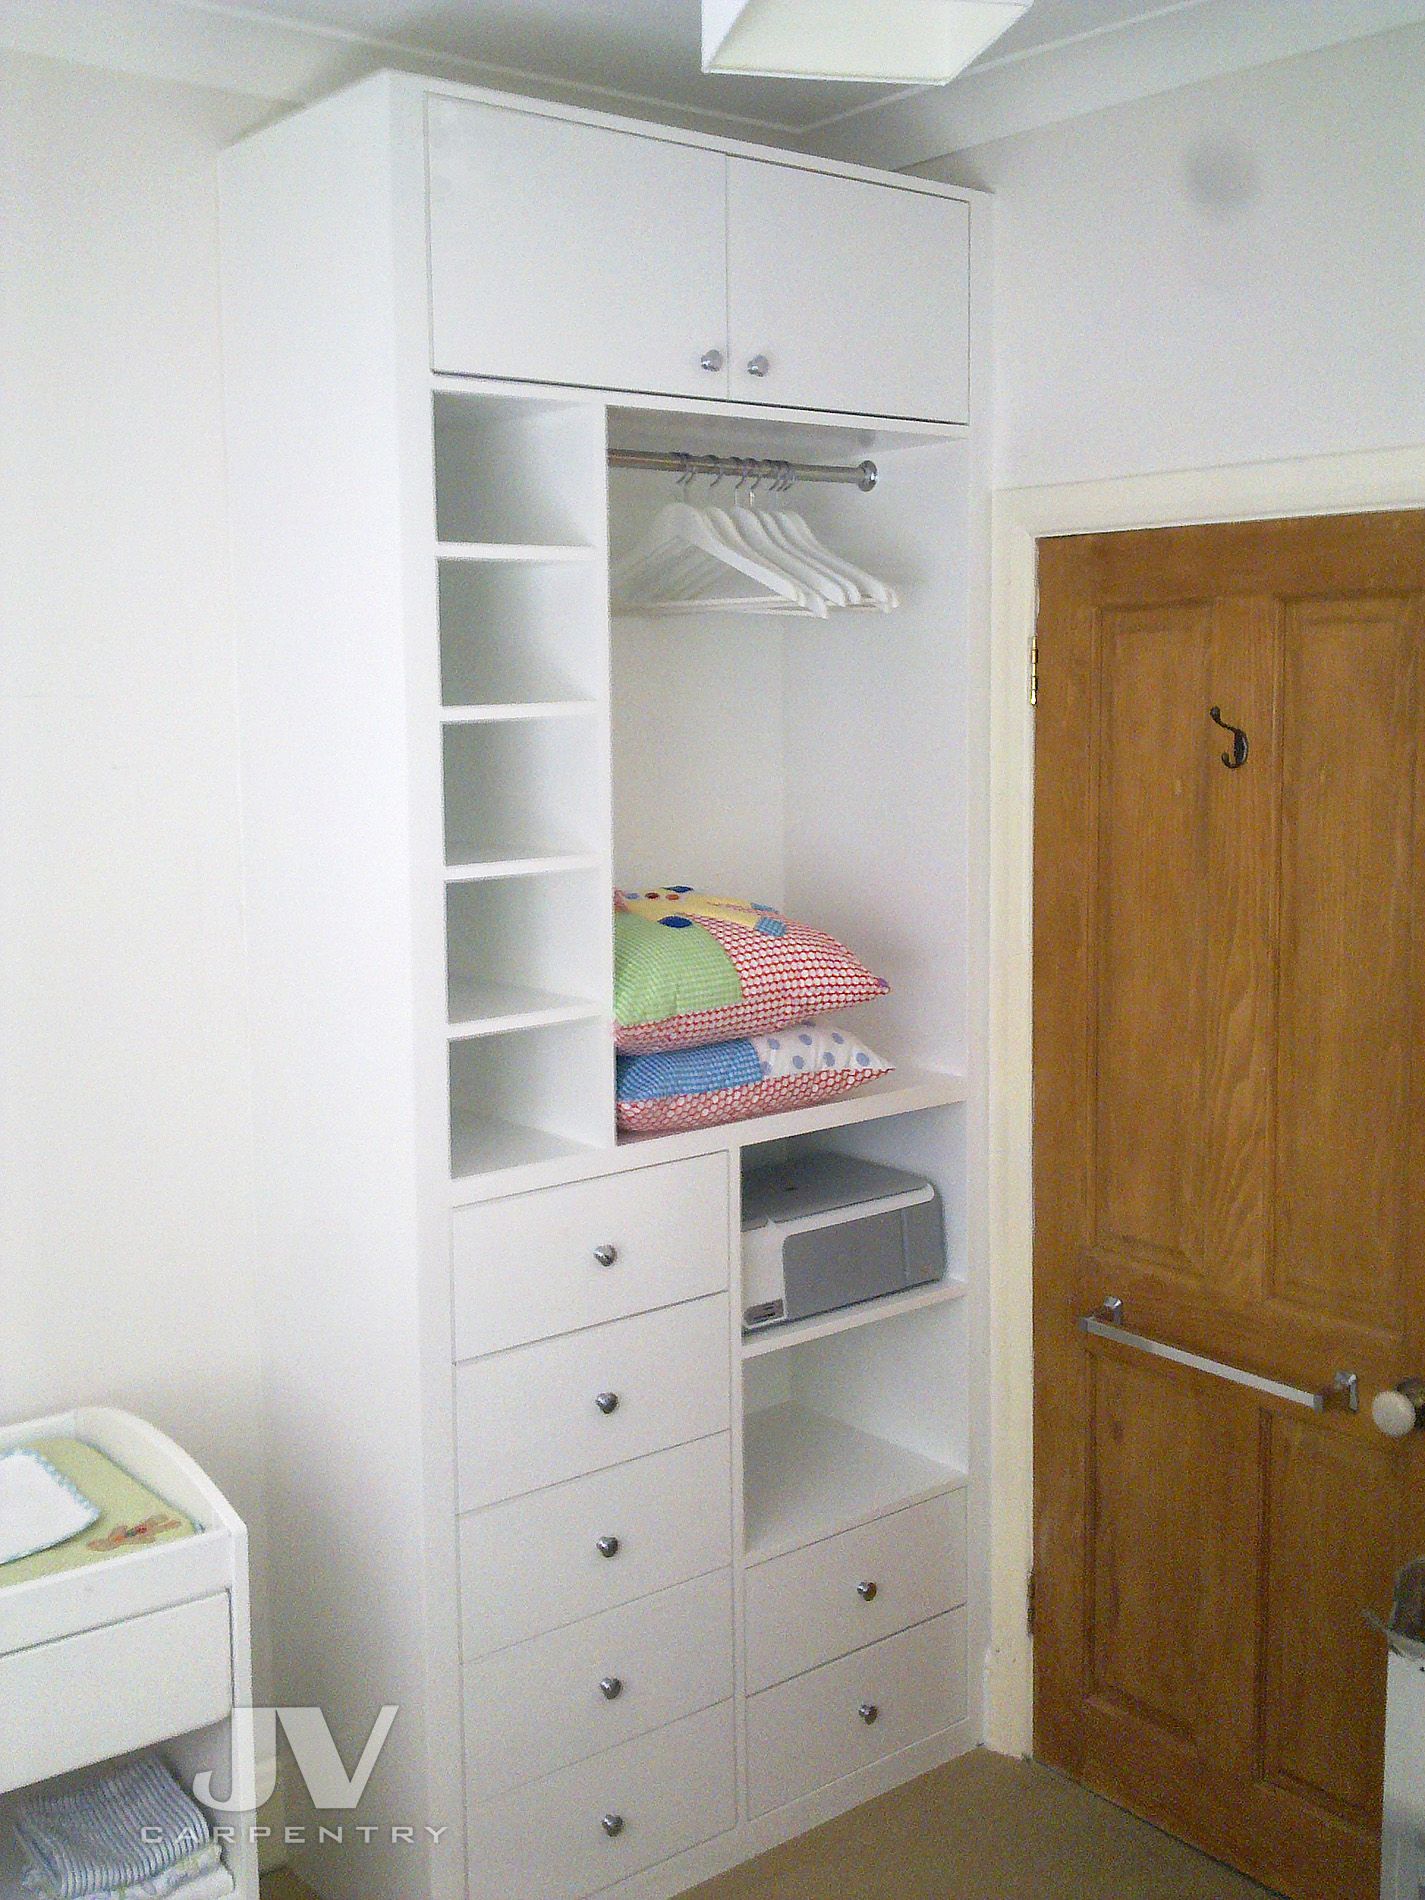 14 Fitted Wardrobe Ideas For A Small Bedroom | Jv Carpentry Pertaining To Short Wardrobes (Photo 14 of 15)